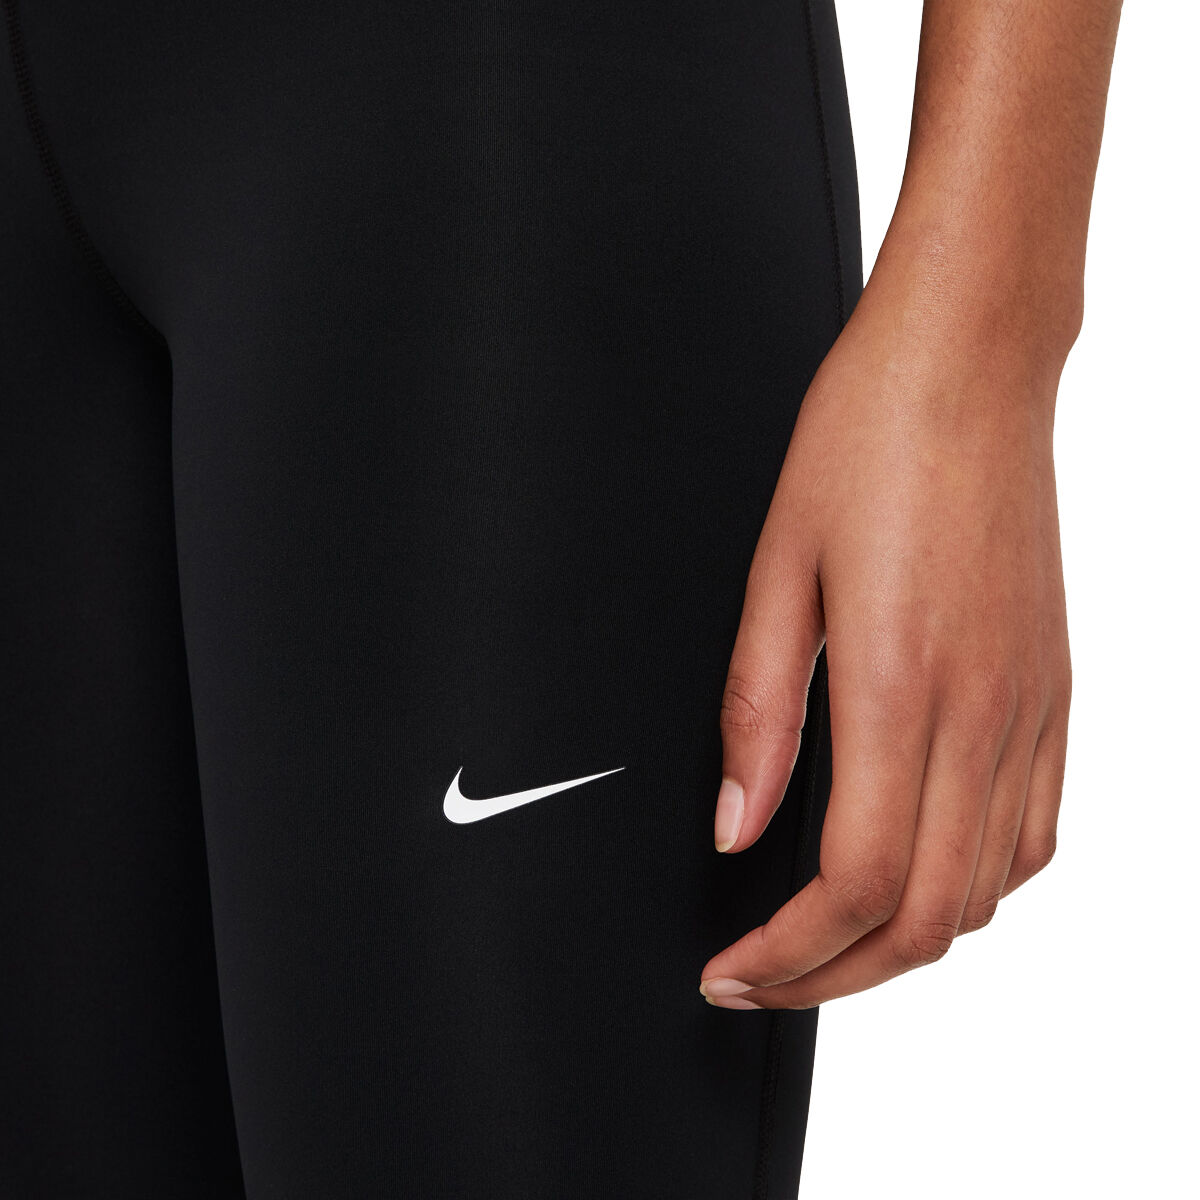 Nike Sculpture Victory Womens Training Tights